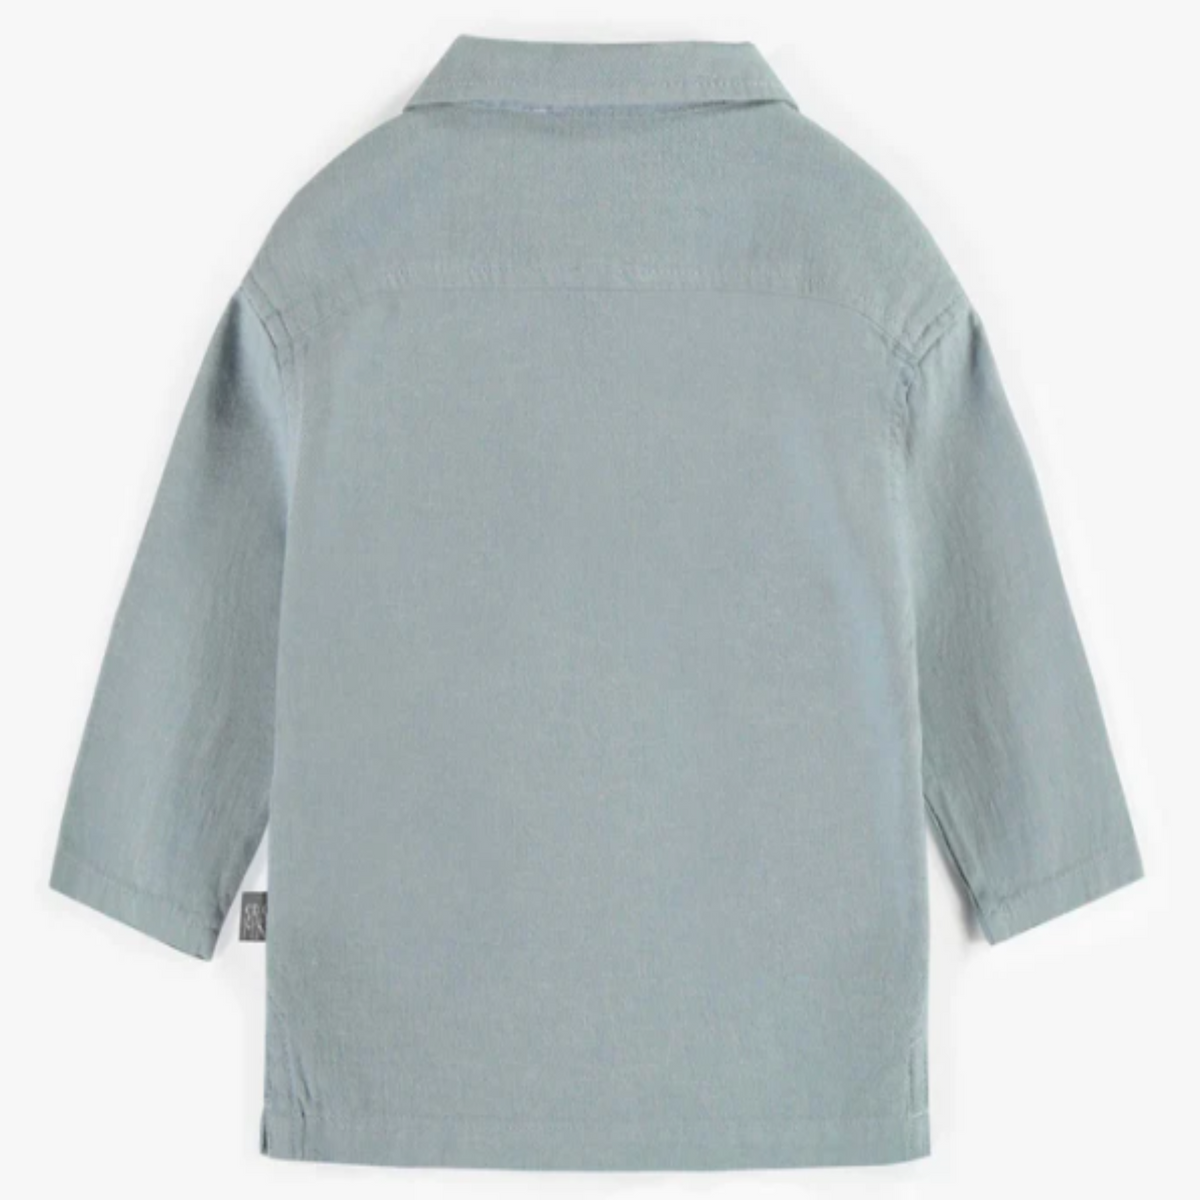 Blue long-sleeved shirt in linen and cotton, baby